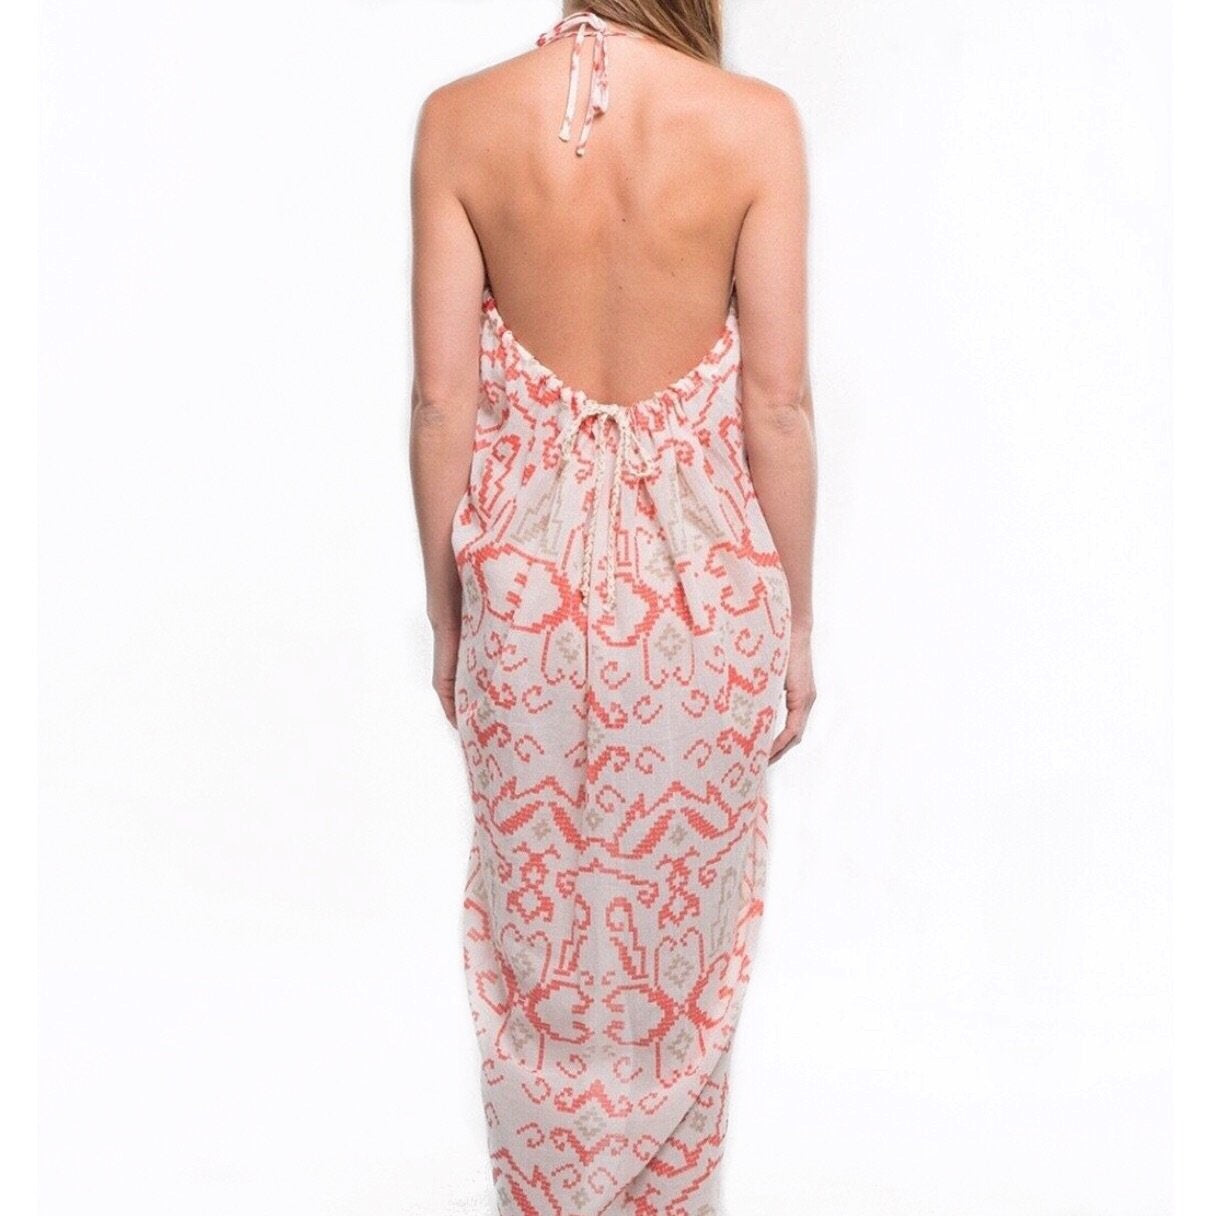 Sale ! Anastasia Ikat Halter Cover Up Dress in Faded Coral - Glamco Boutique 